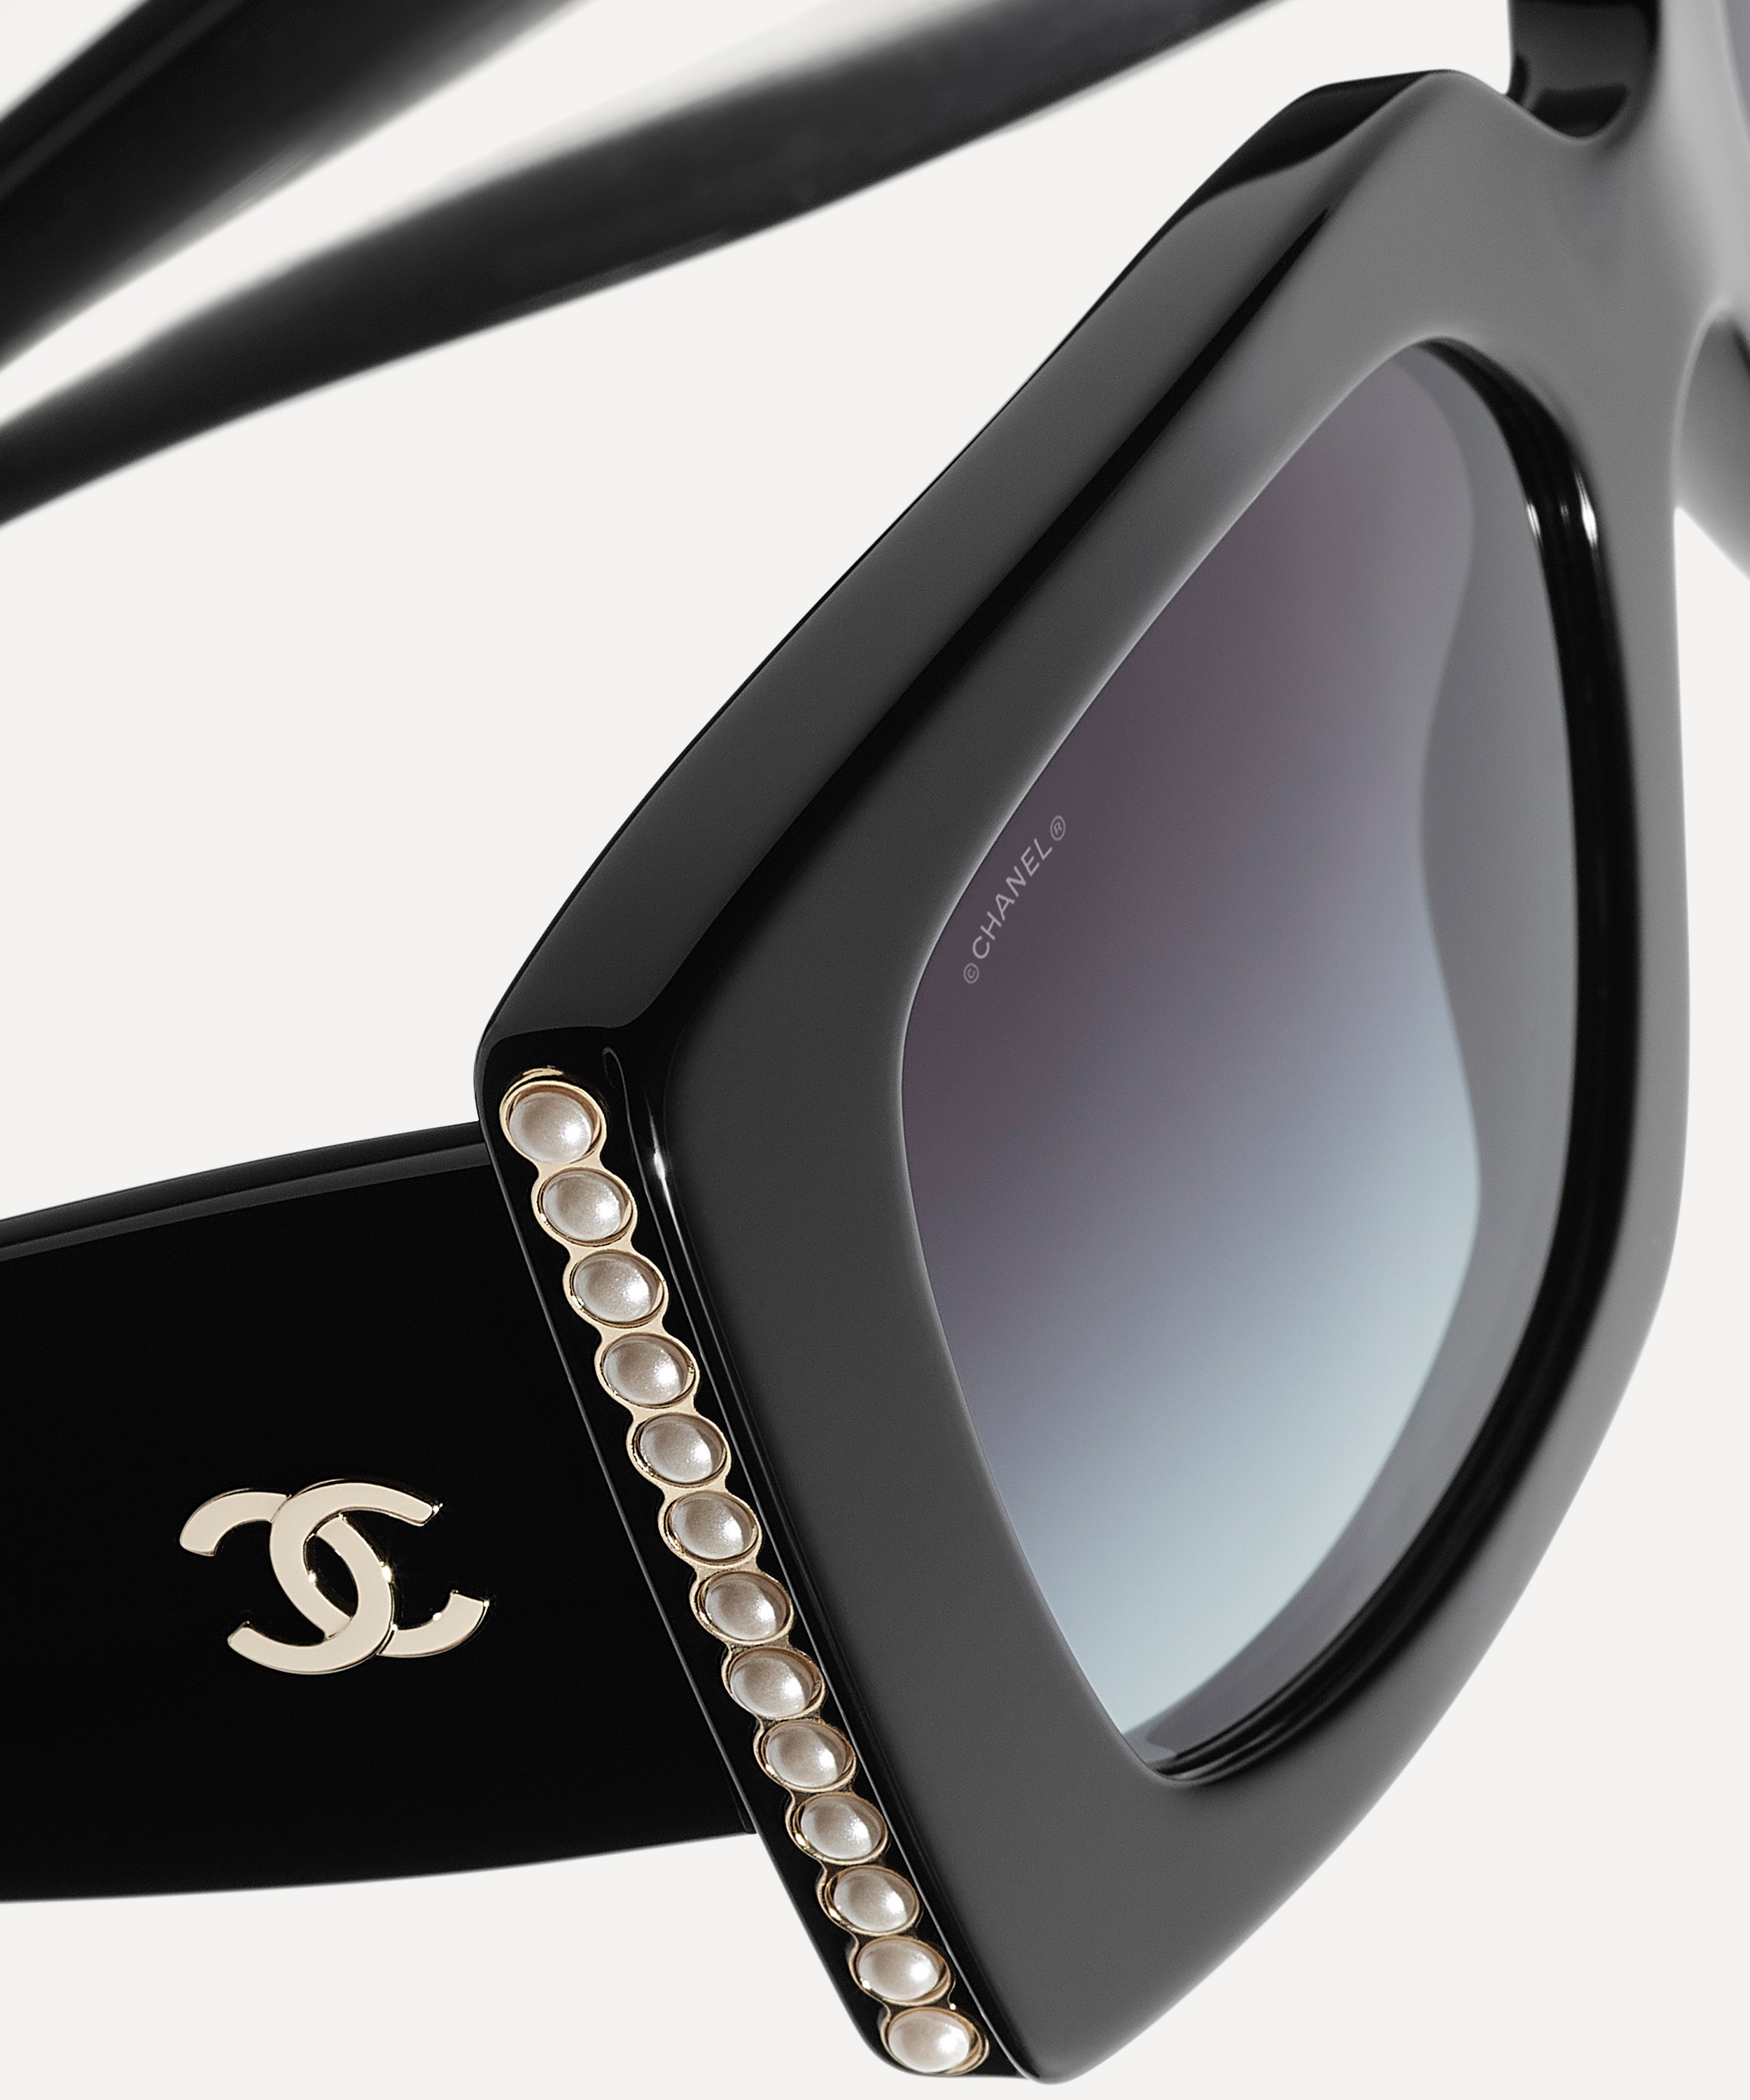 Shop CHANEL 2023 SS Square Sunglasses by ROSEGOLD